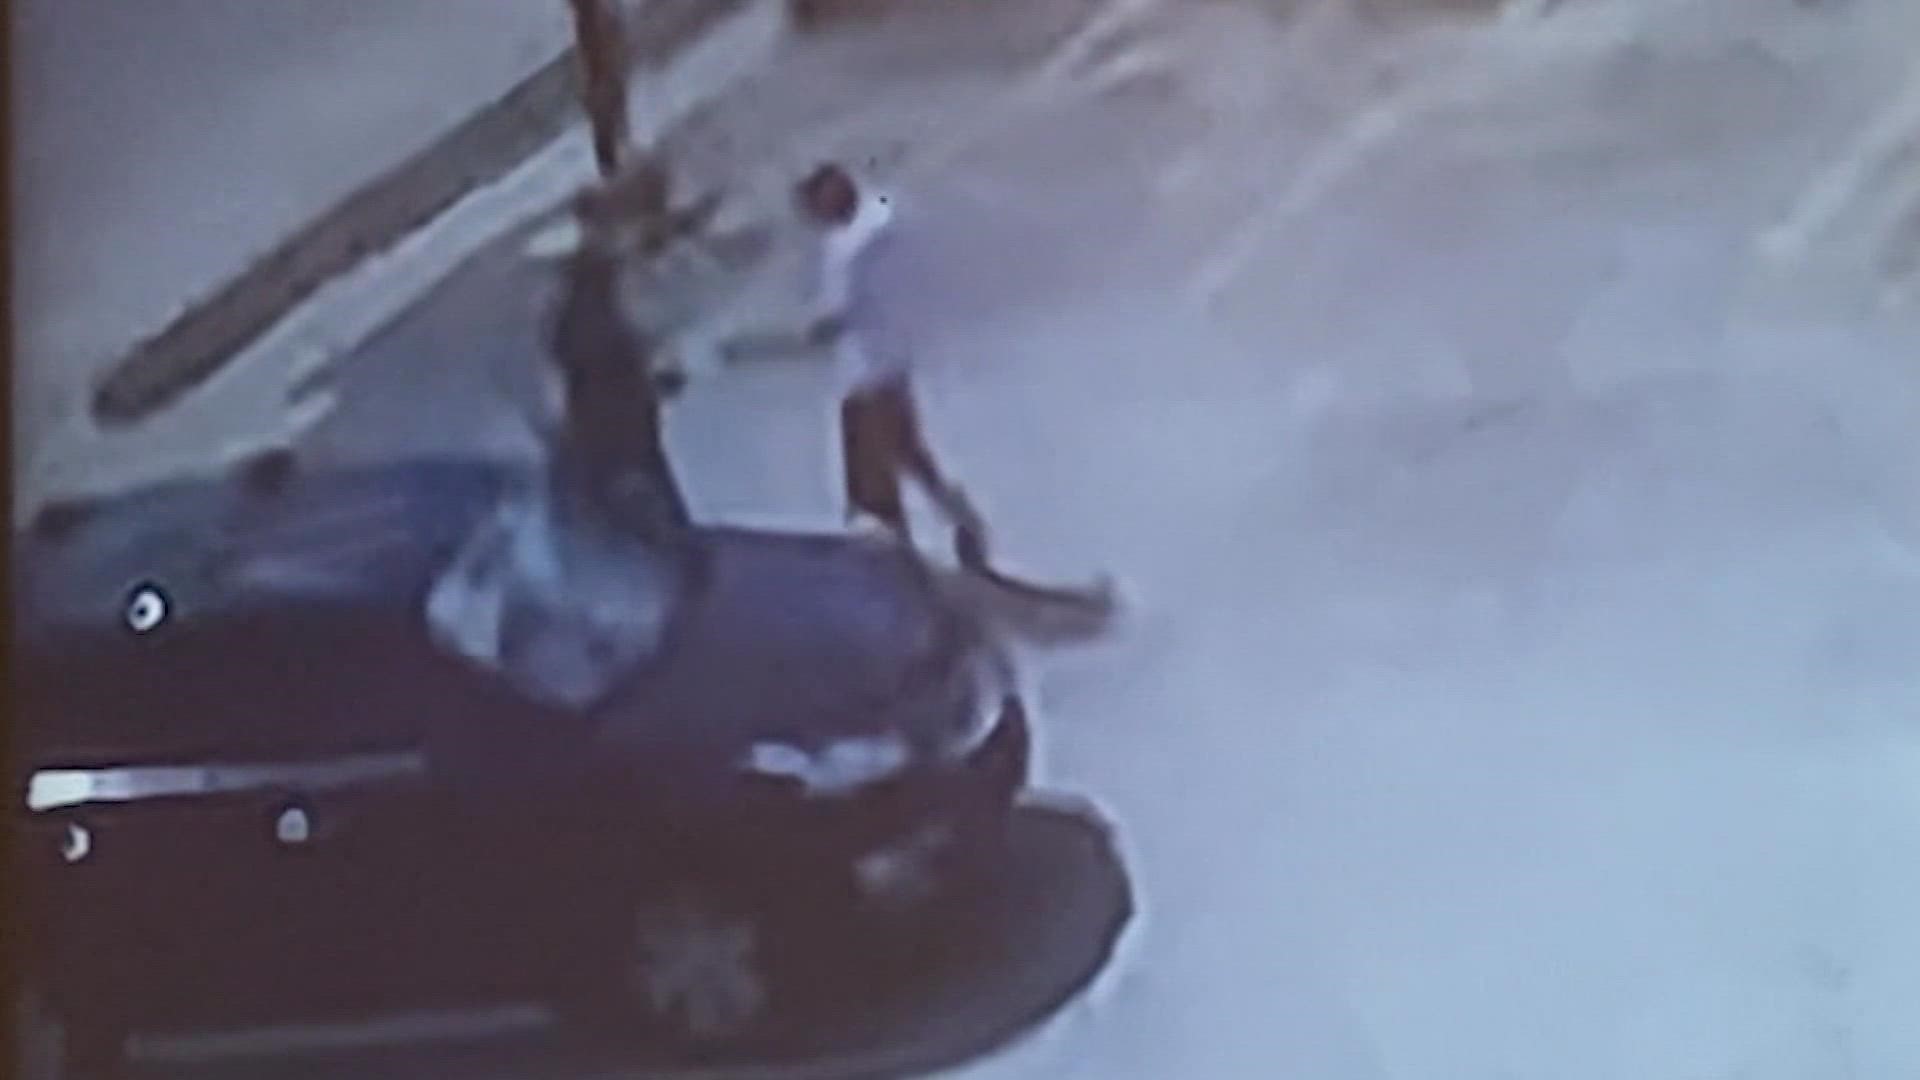 Surveillance video obtained by KHOU 11 News shows the moments Mike Essien was shot and his killer took off in the SUV with 2-year-old Micah in the backseat.